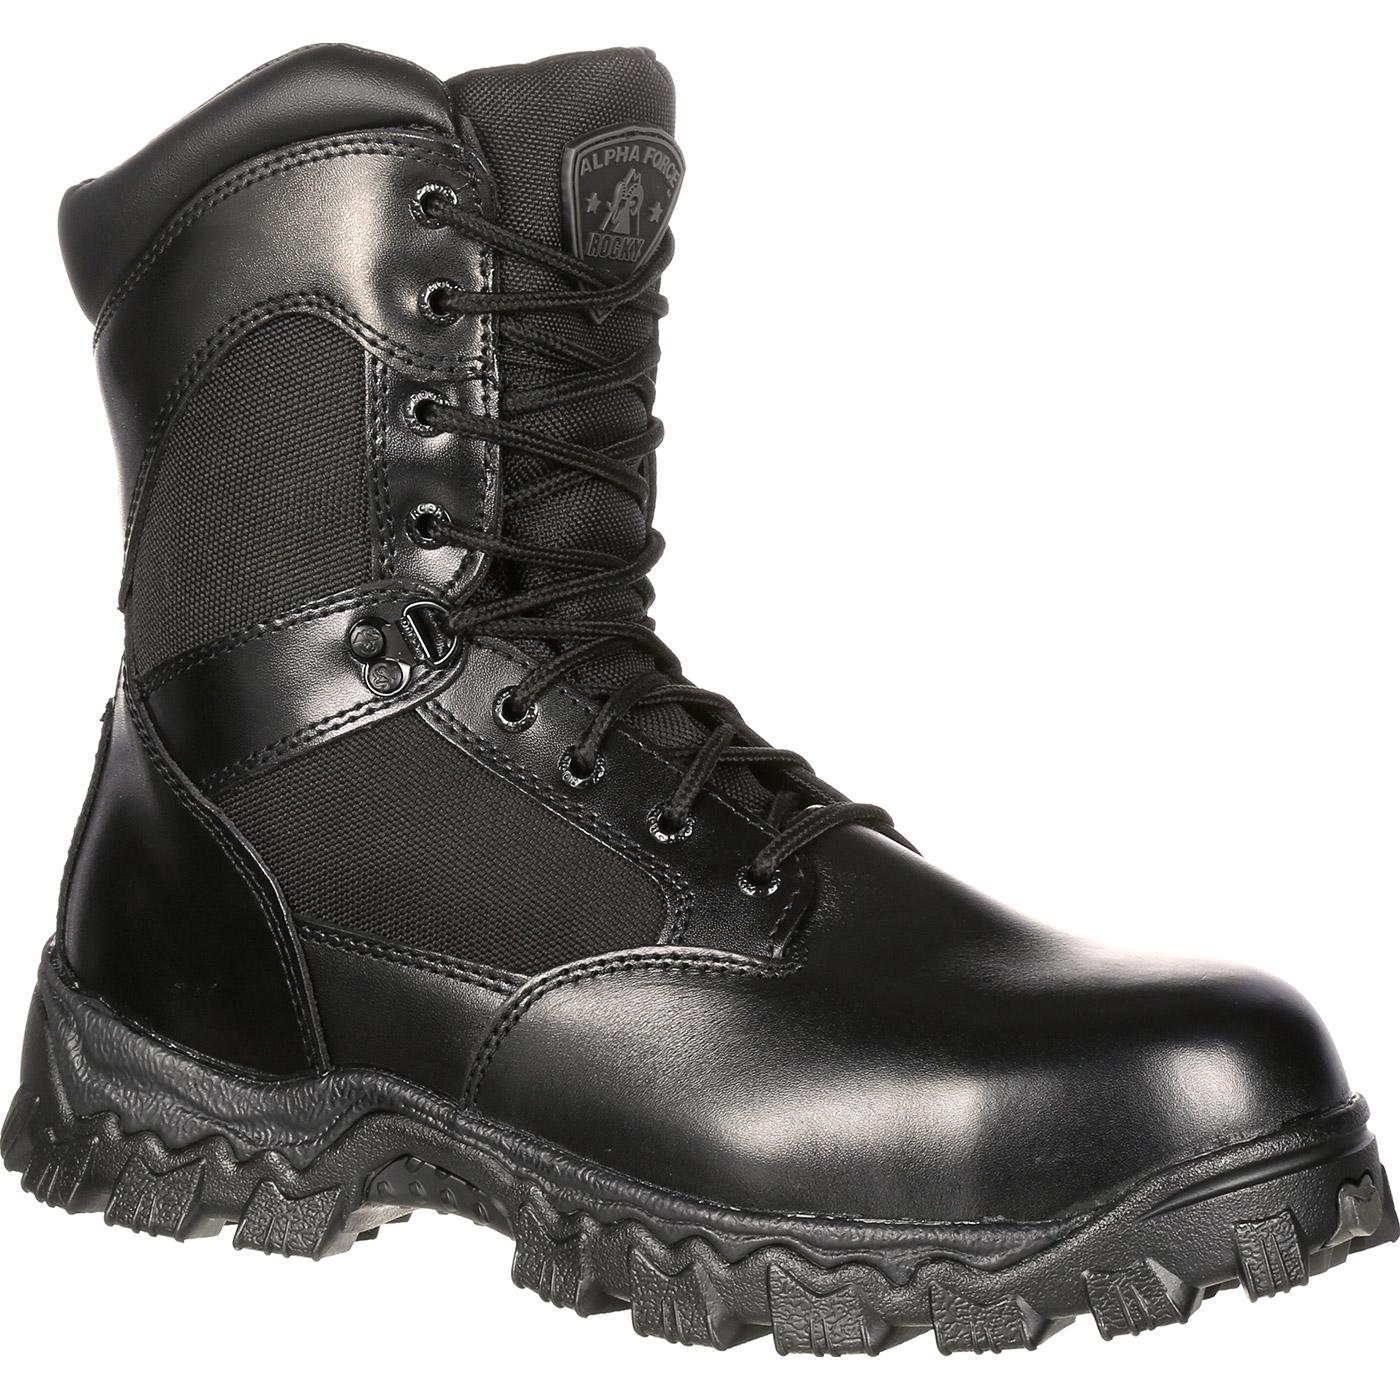 Rocky Alpha Force Waterproof 400G Insulated Public Service Boot Size 5.5(W) - image 1 of 7